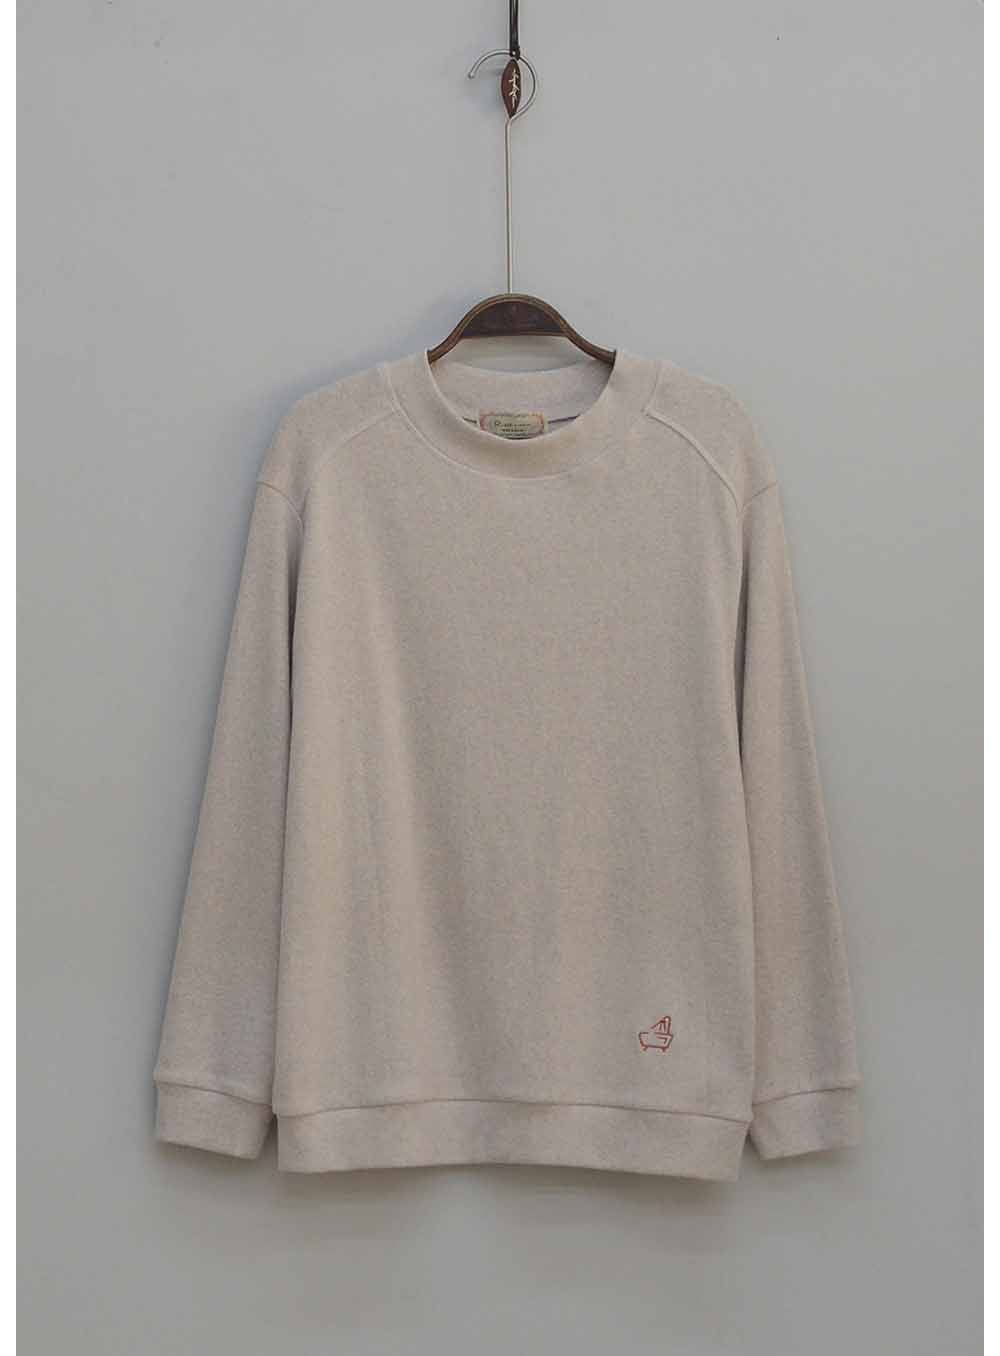 long sleeved tee cream color image-S1L55